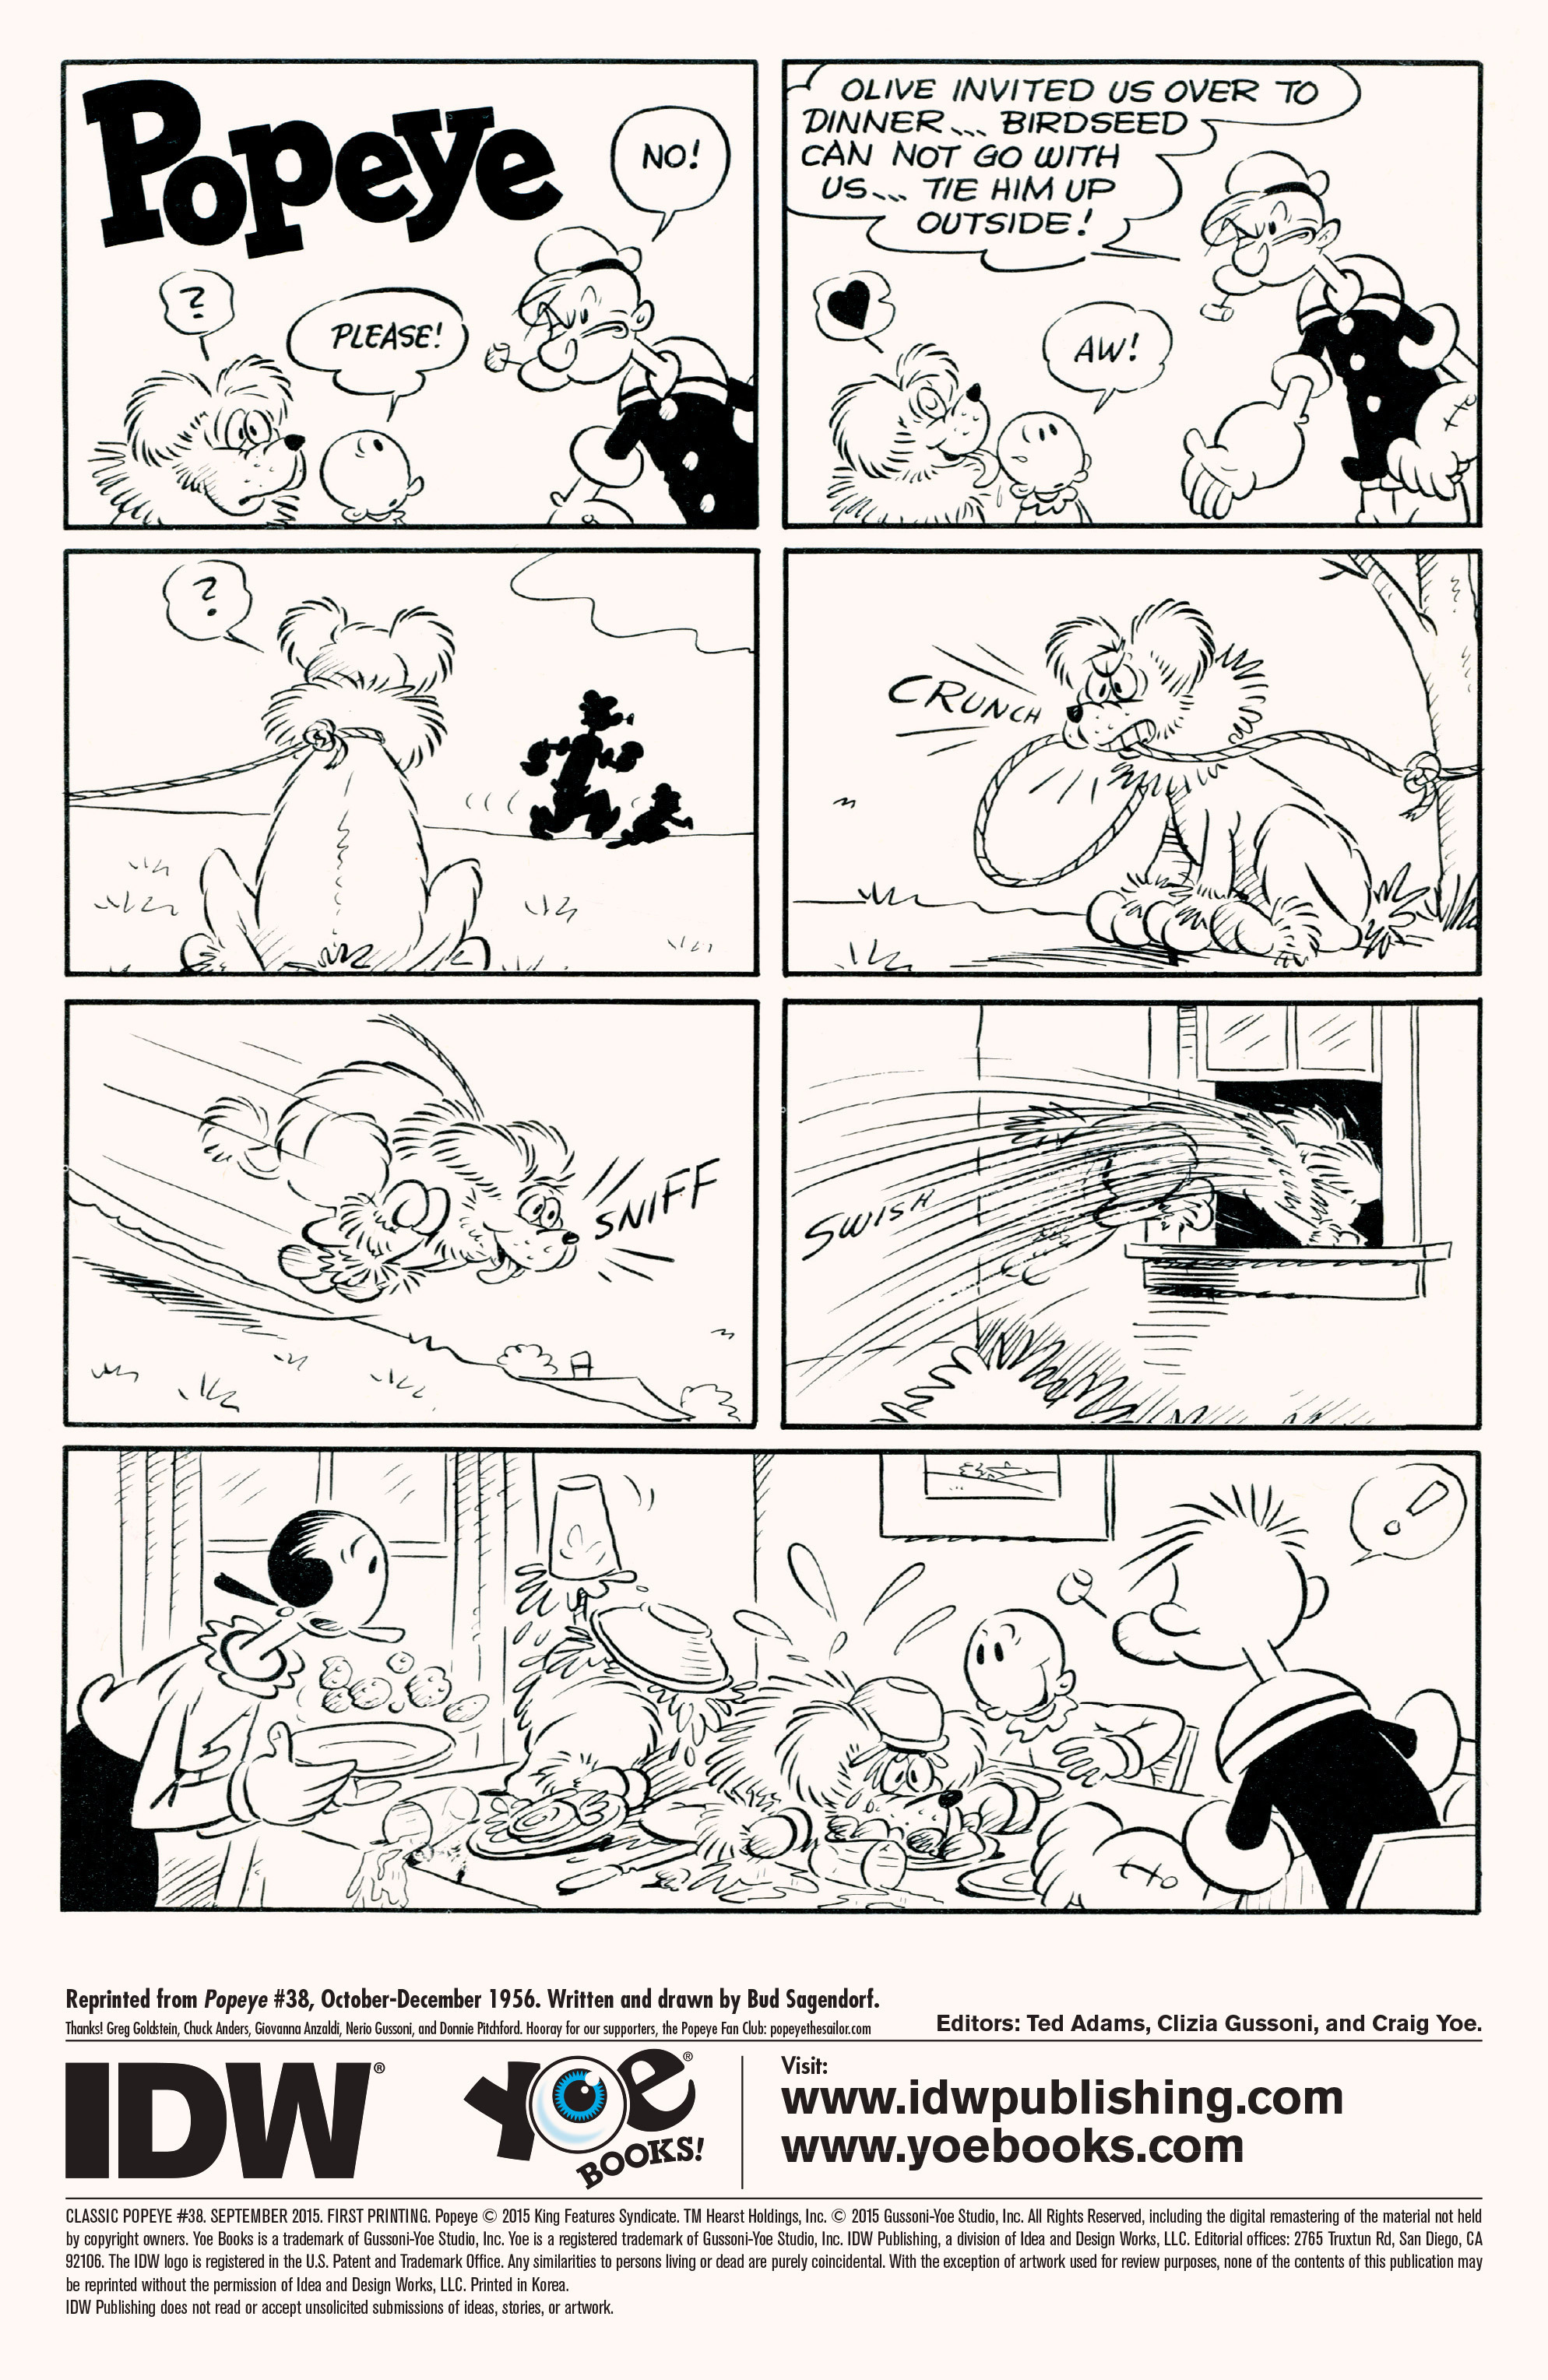 Read online Classic Popeye comic -  Issue #38 - 2